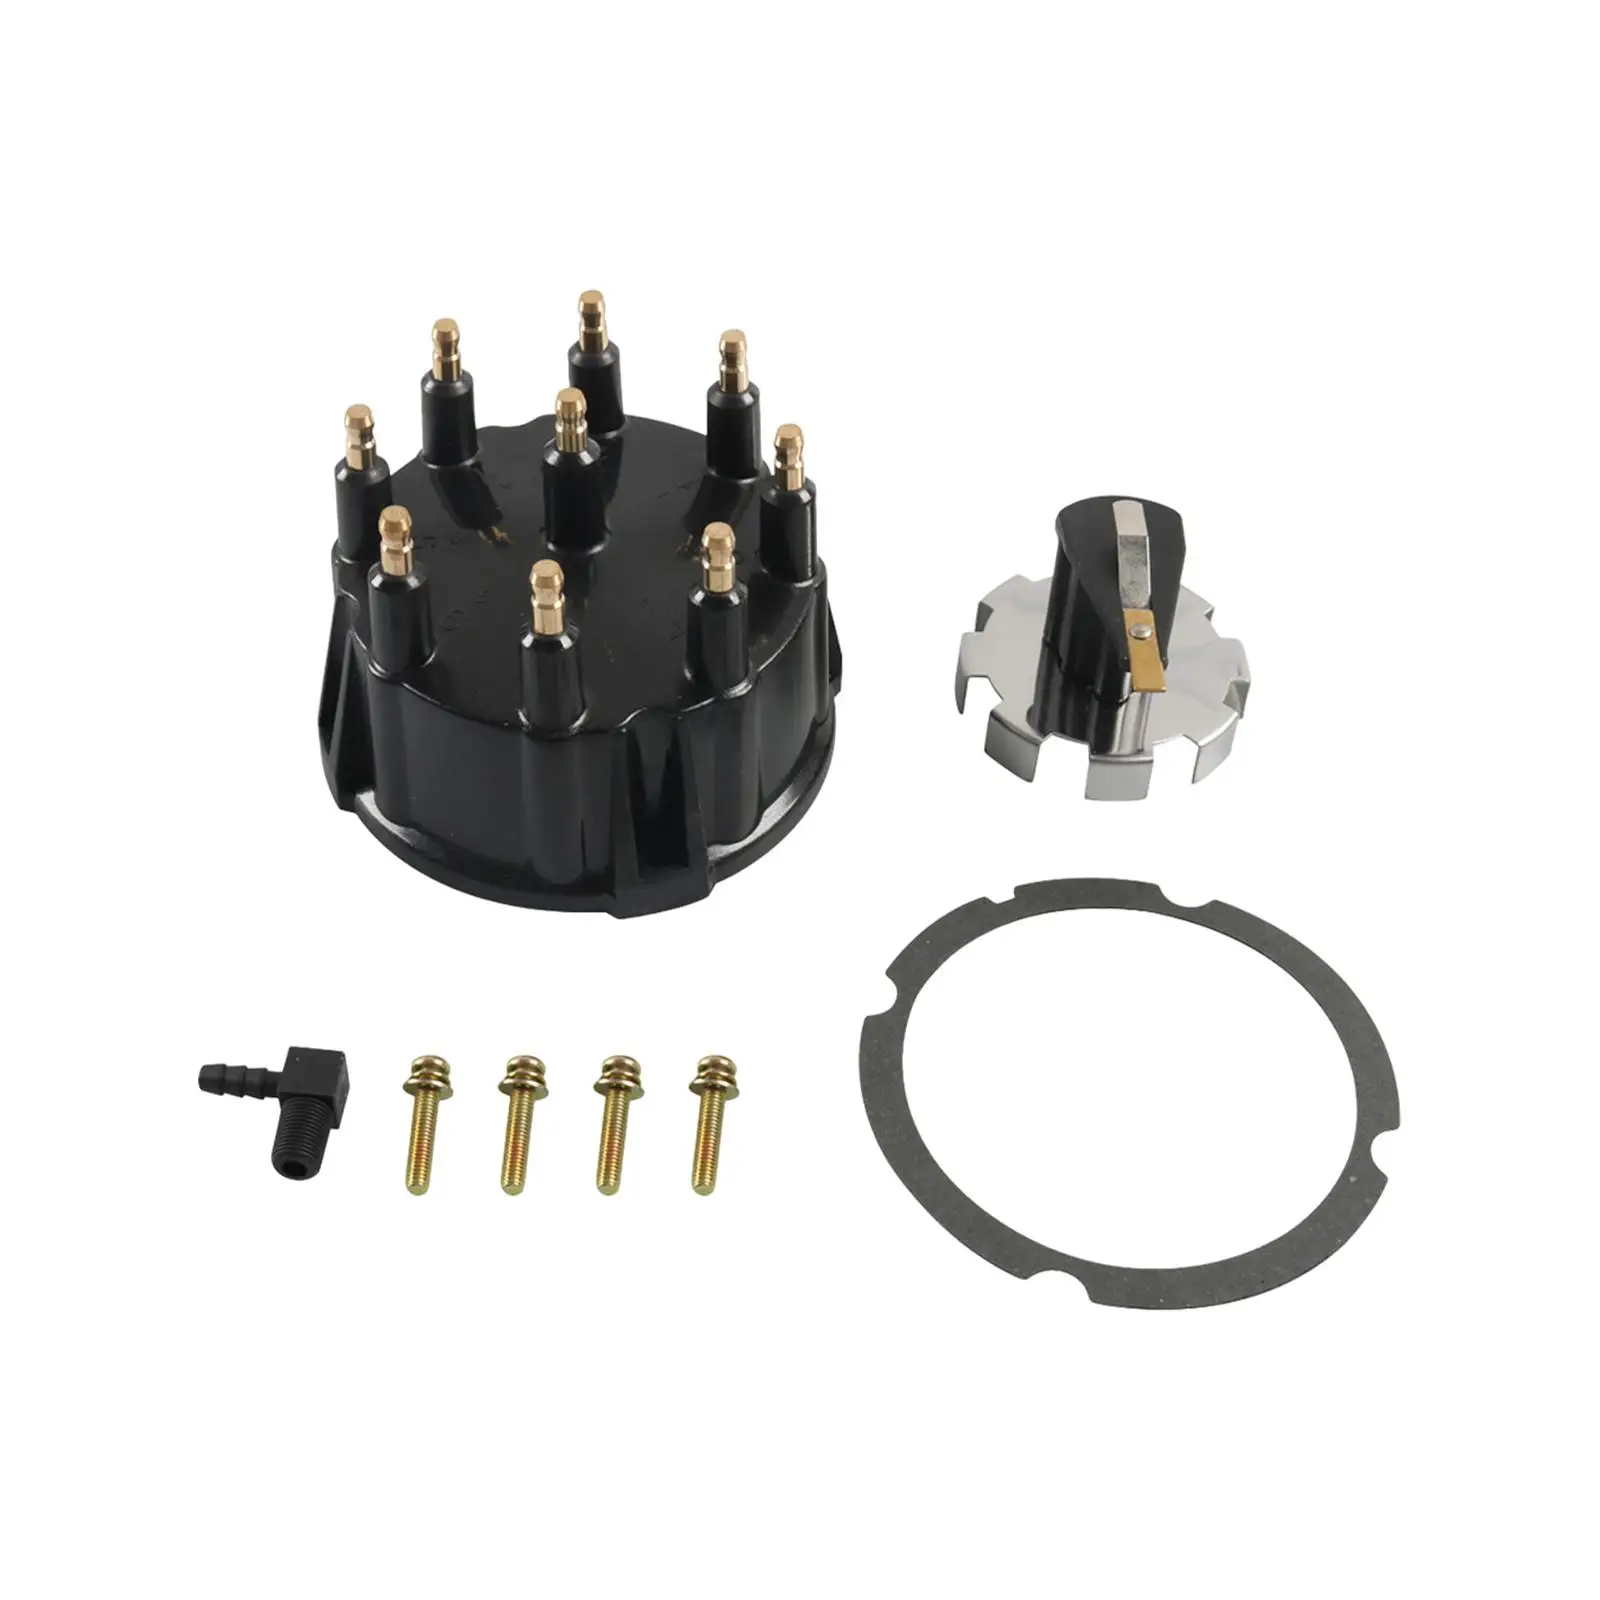 Distributor Cap Tune up Set Spare Parts Accessories 805759Q3 Replaces for All 5.0 5.7 7.4 8.2 V8 W/ Bolt Ignition 1980-2003